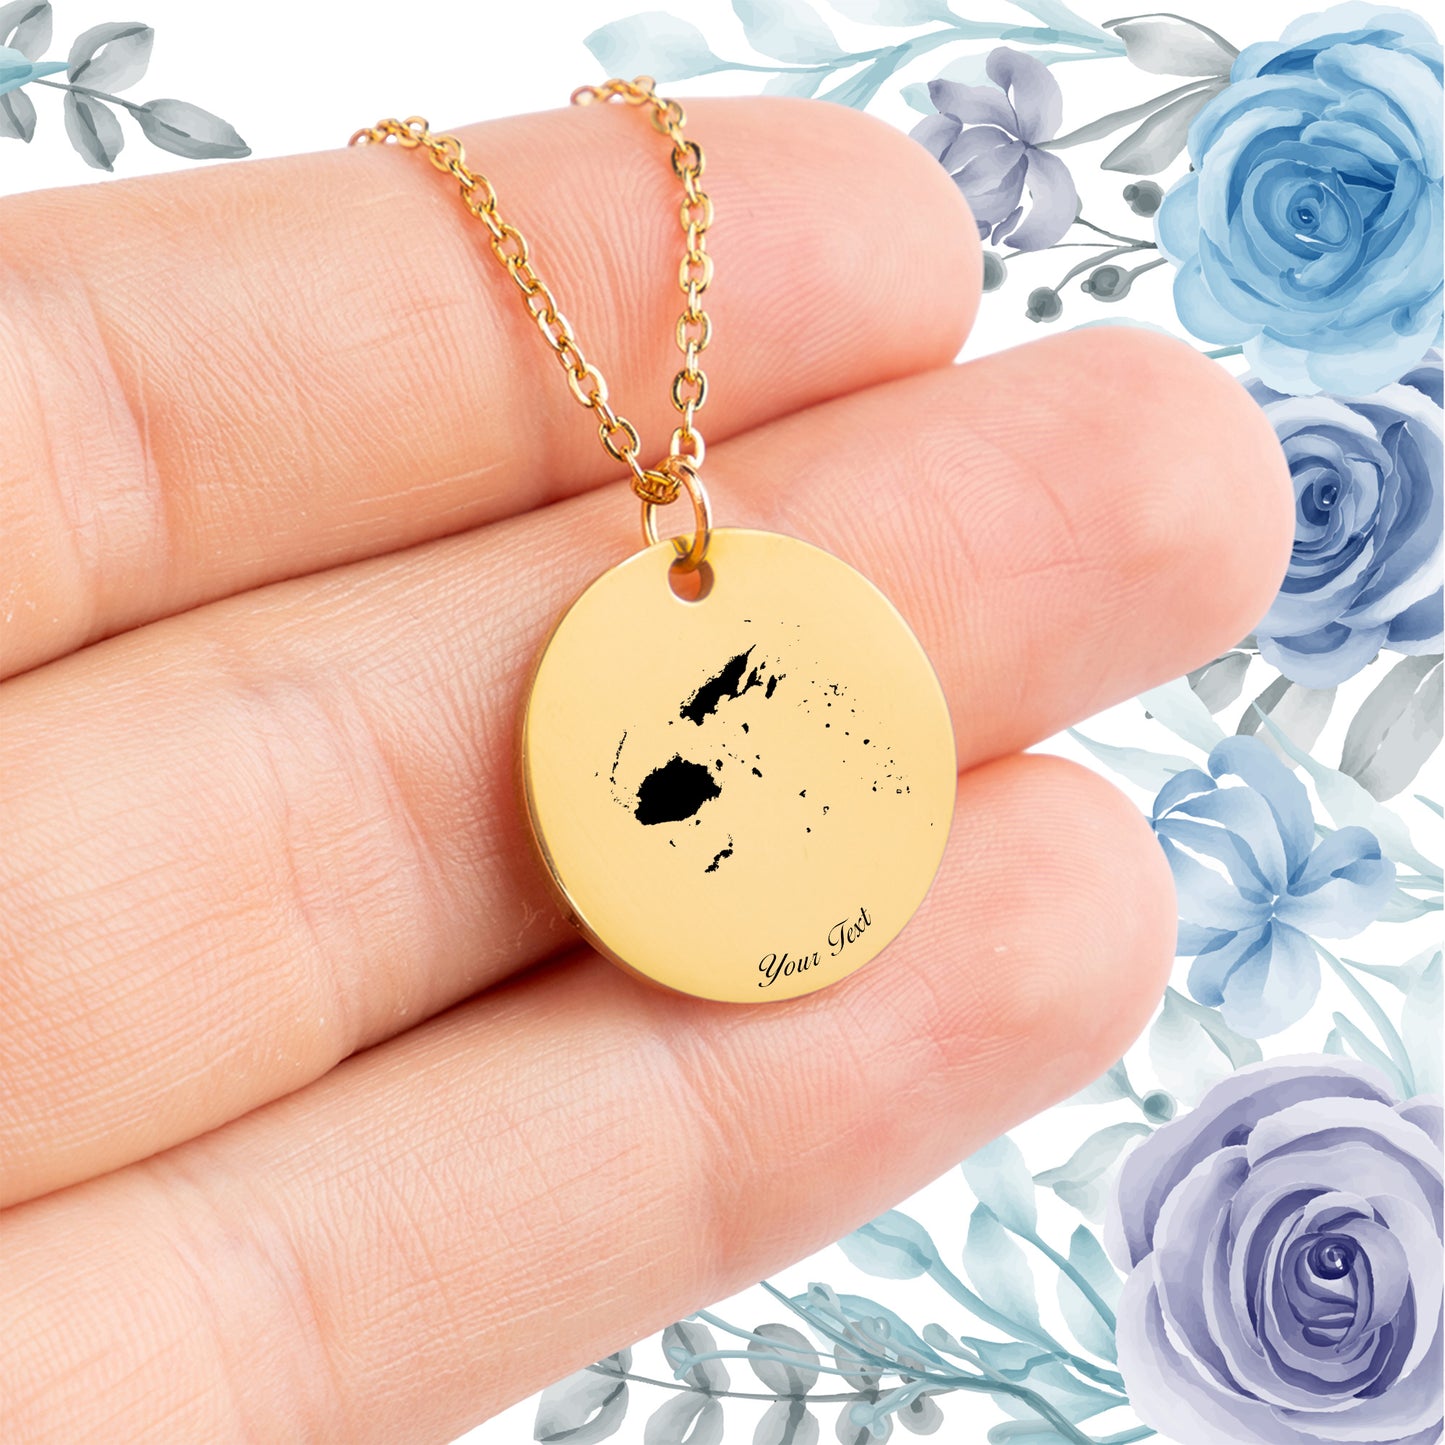 Fiji Country Map Necklace - Personalizable Jewelry